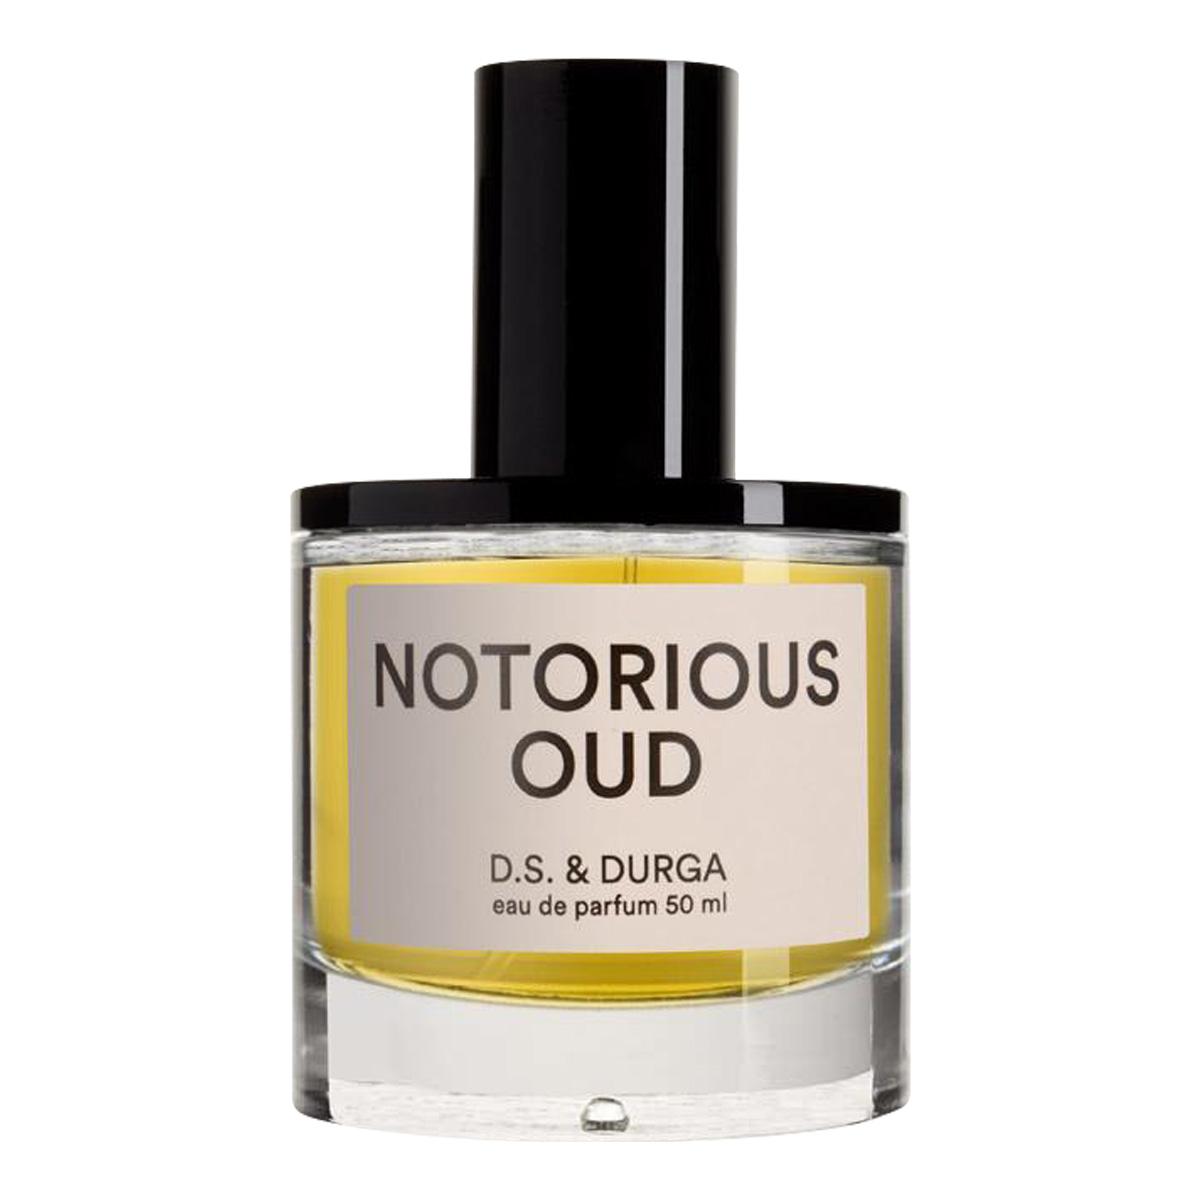 Primary image of Notorious Oud EDP